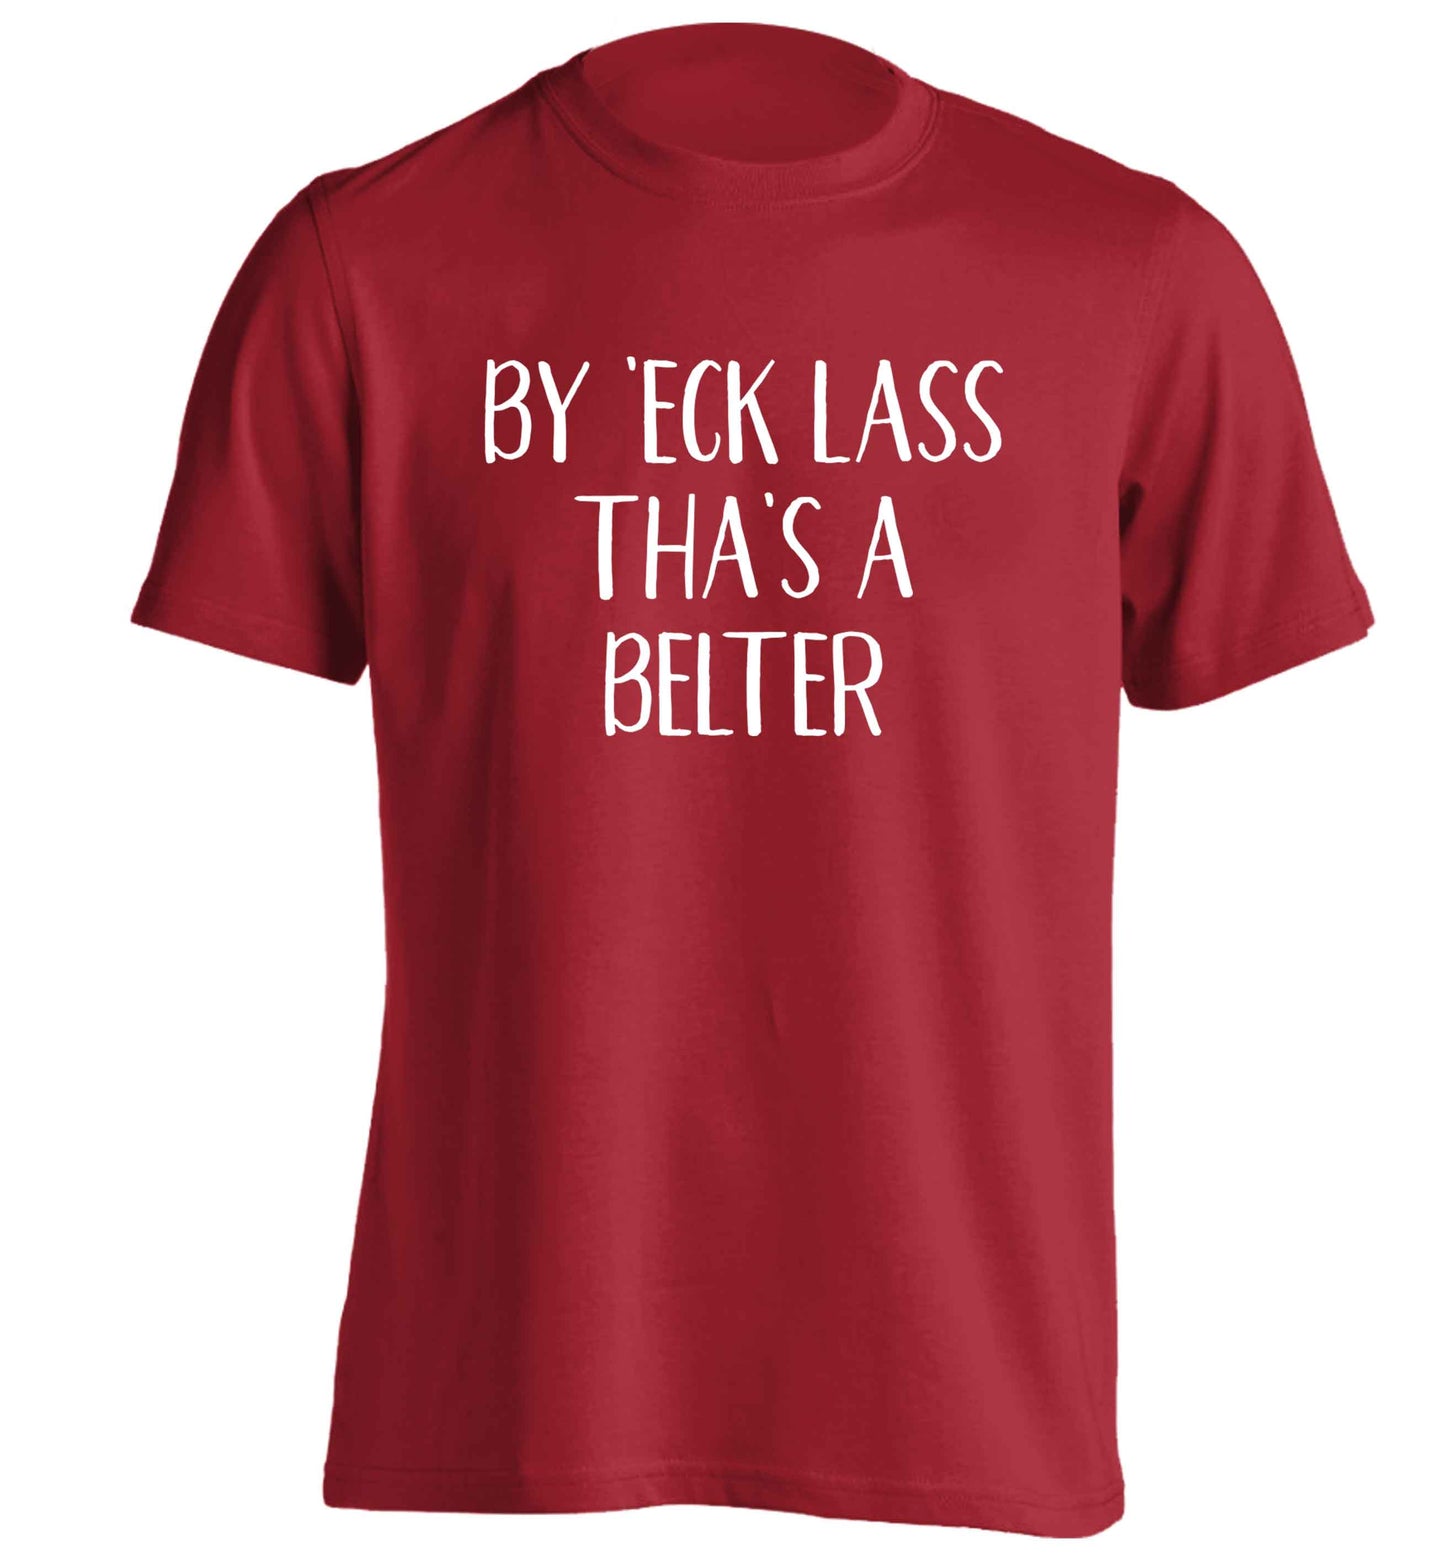 Be 'eck lass tha's a belter adults unisex red Tshirt 2XL